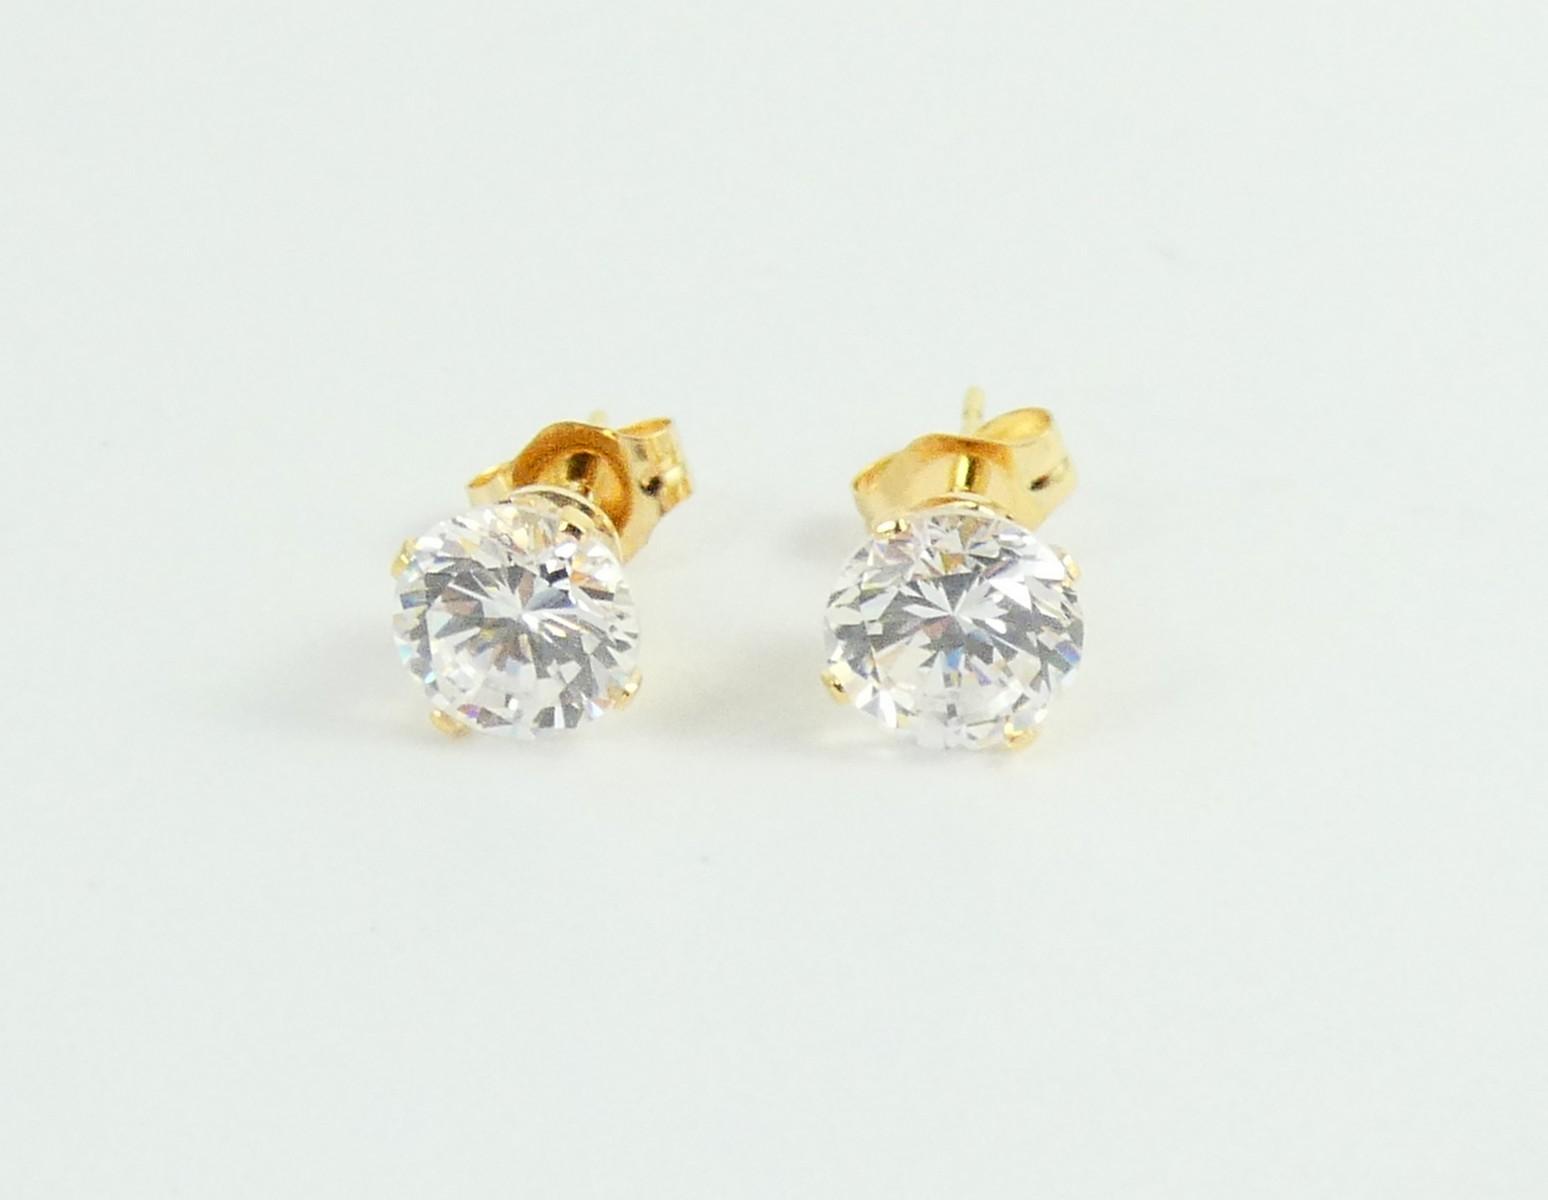 PAIR STUD EARRINGS | ESTATE & CONSIGNMENT JEWELLERY, WATCHES | Online ...